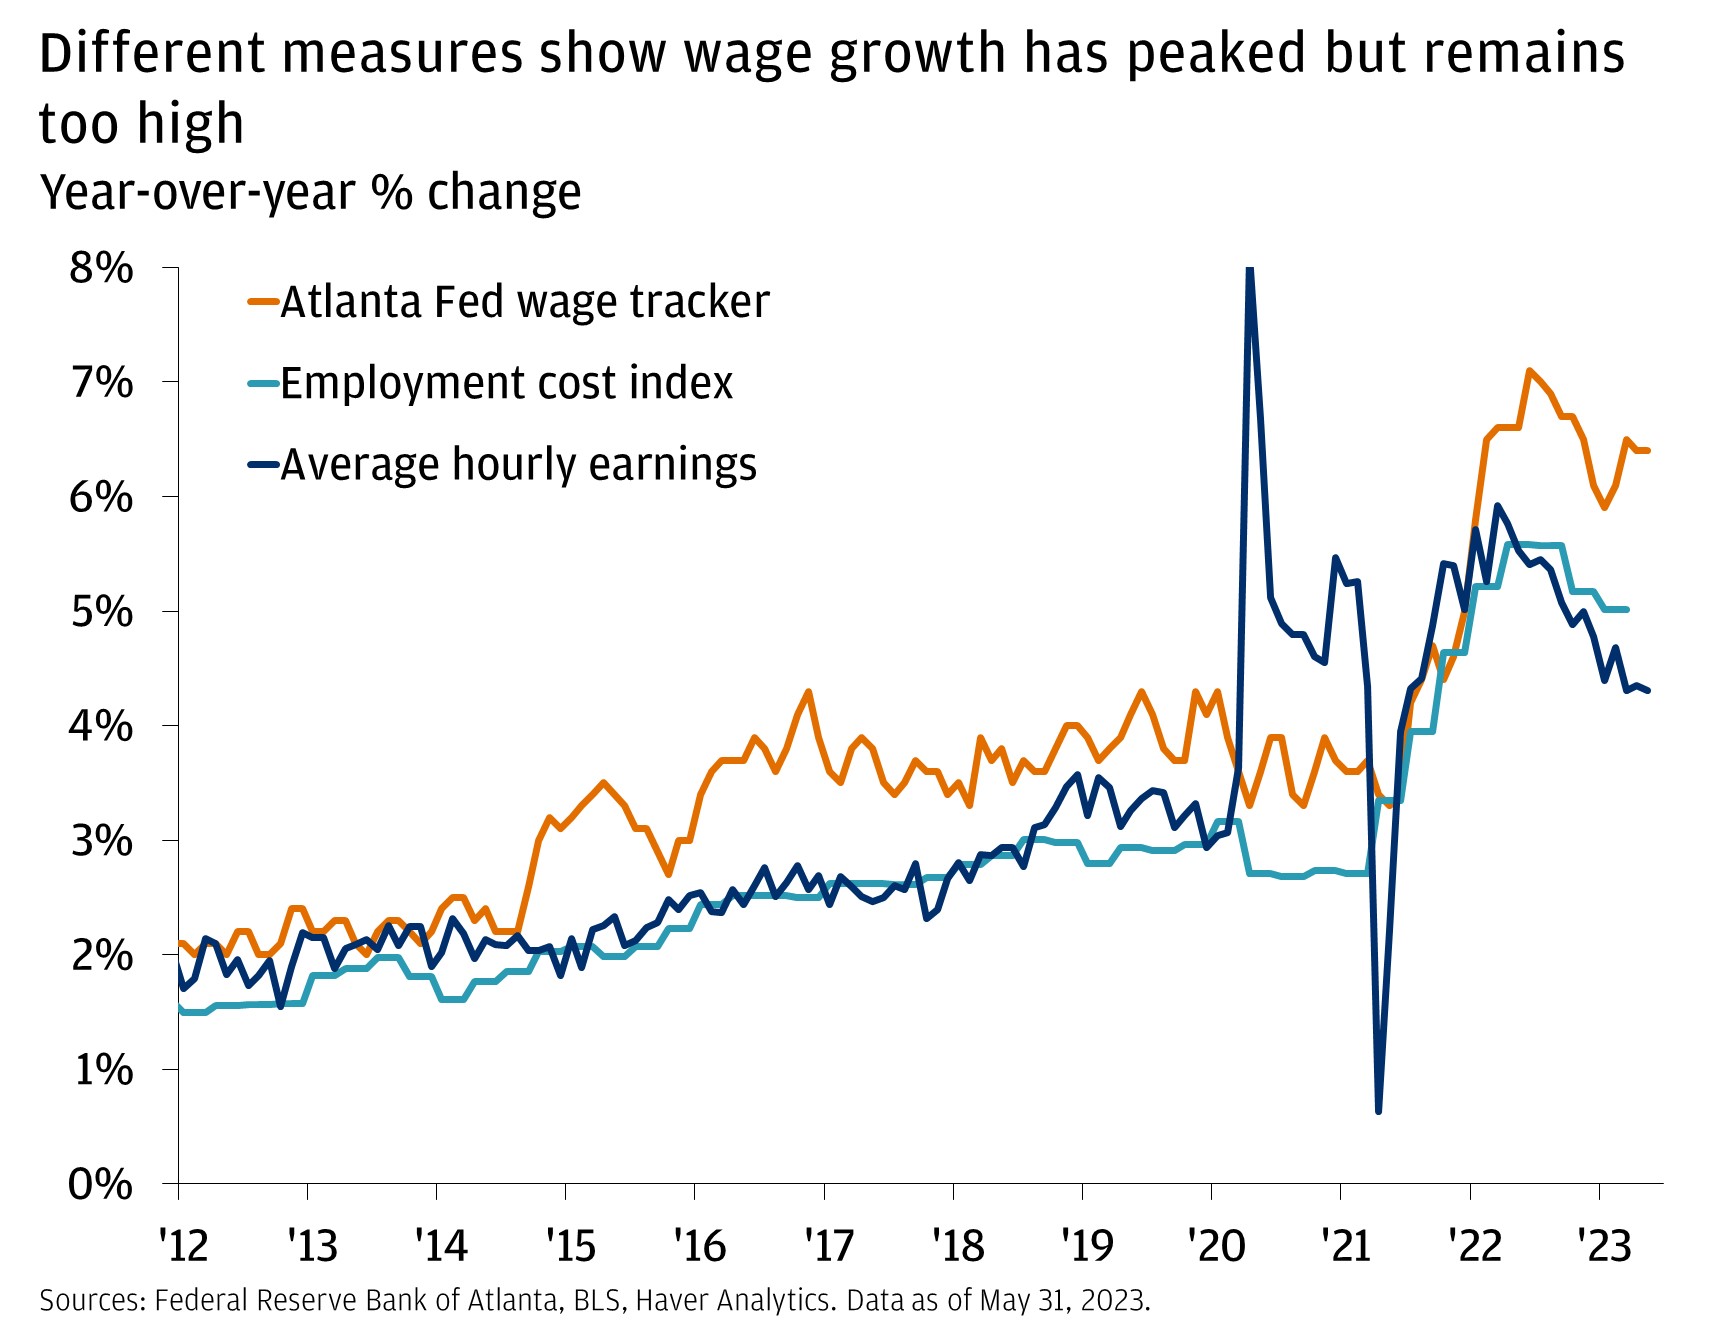 Different measures show wage growth has peaked but remains too high